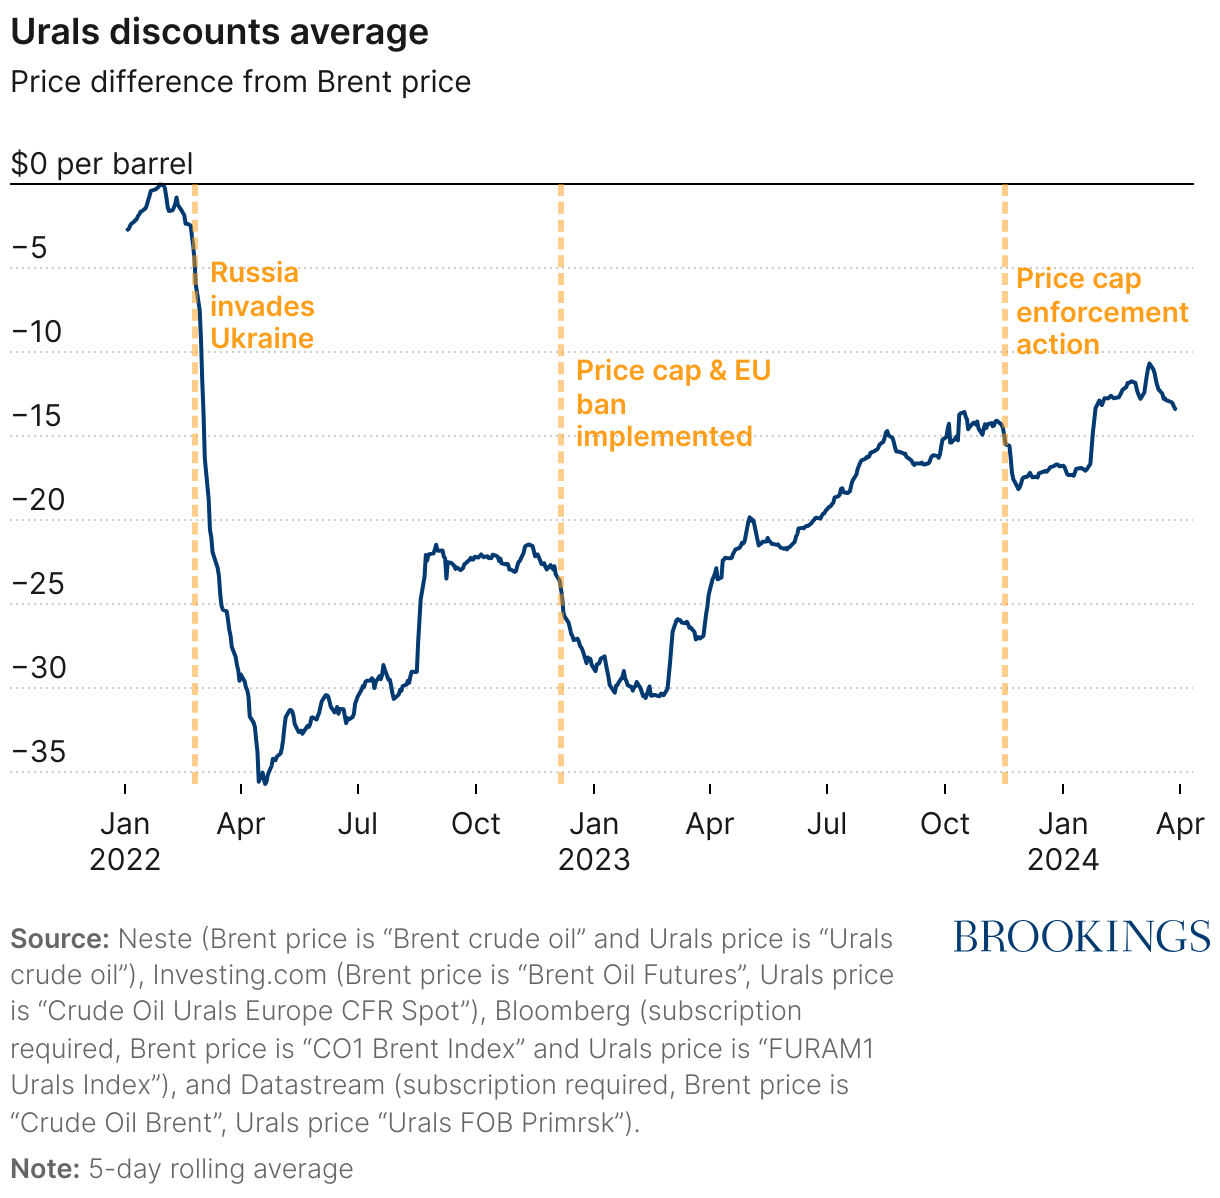 Urals oil price dropped relative to Brent price after Russian invasion of Ukraine, price cap implementation, and price cap enforcement actions. 